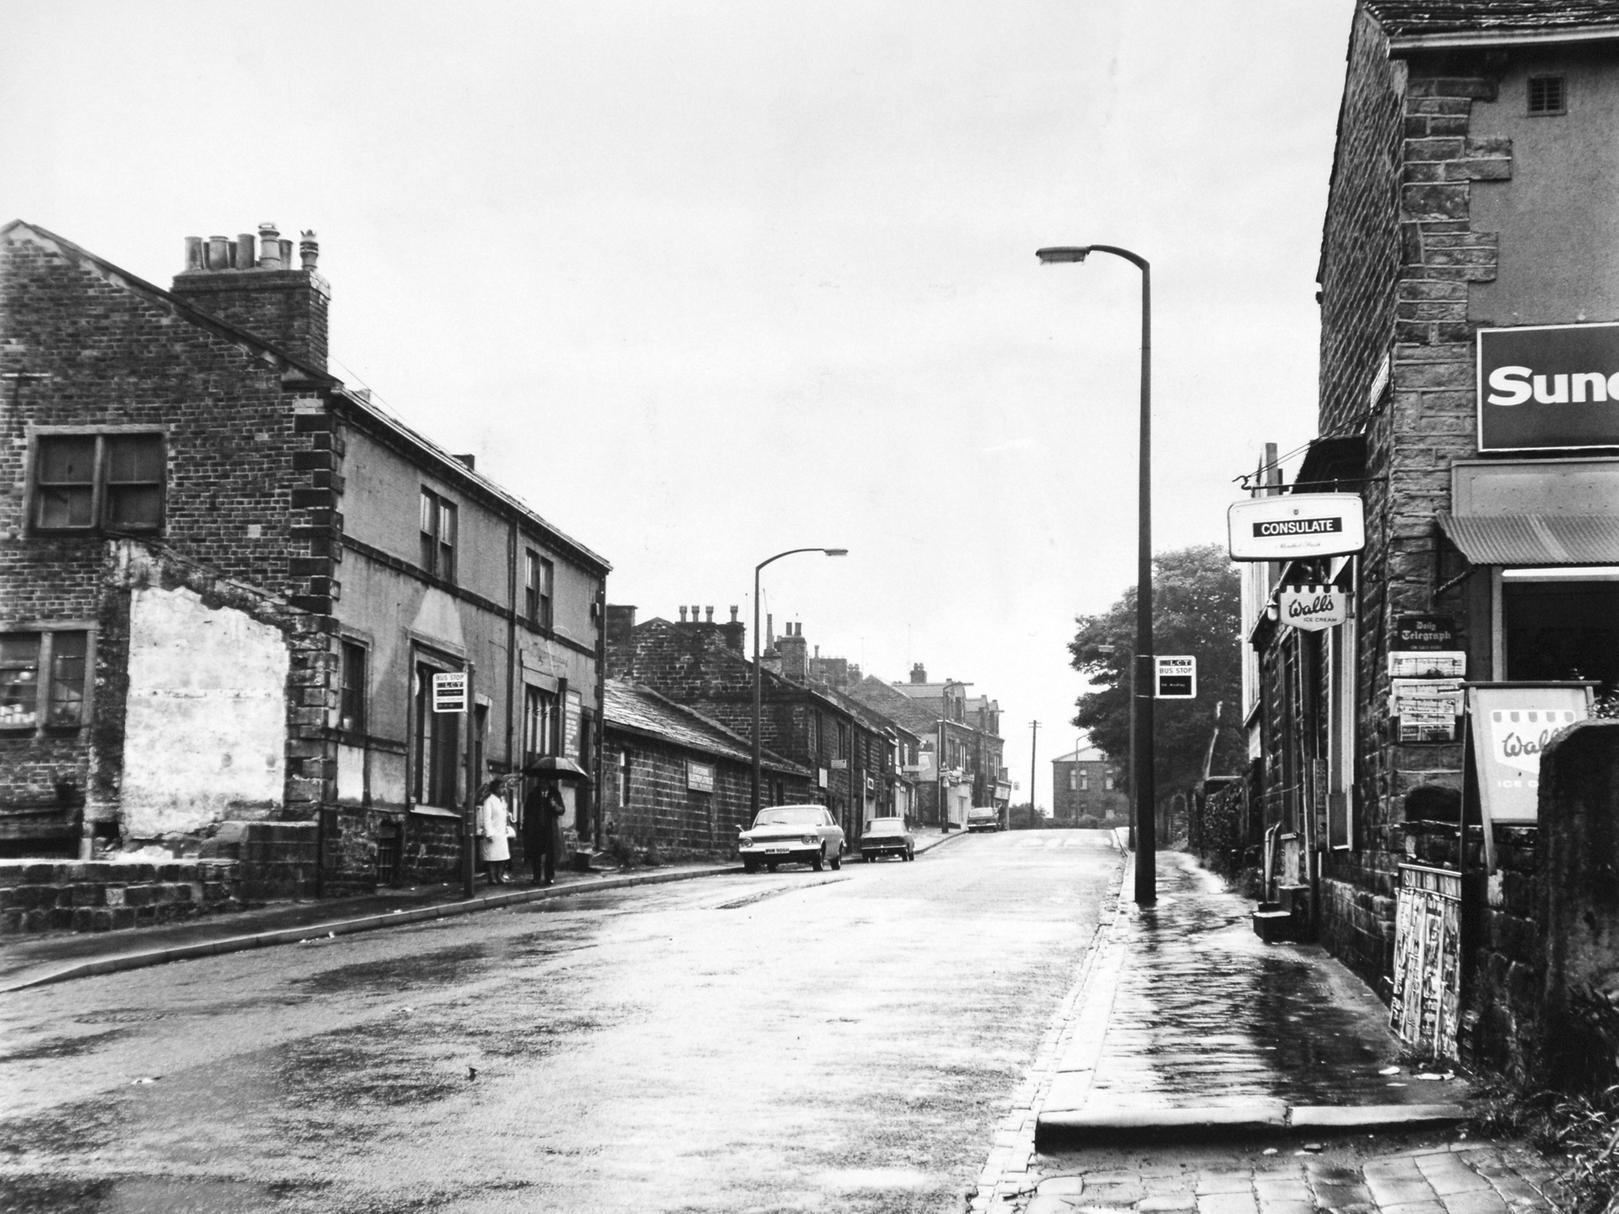 A view of the main street in Rodley in July 1970.